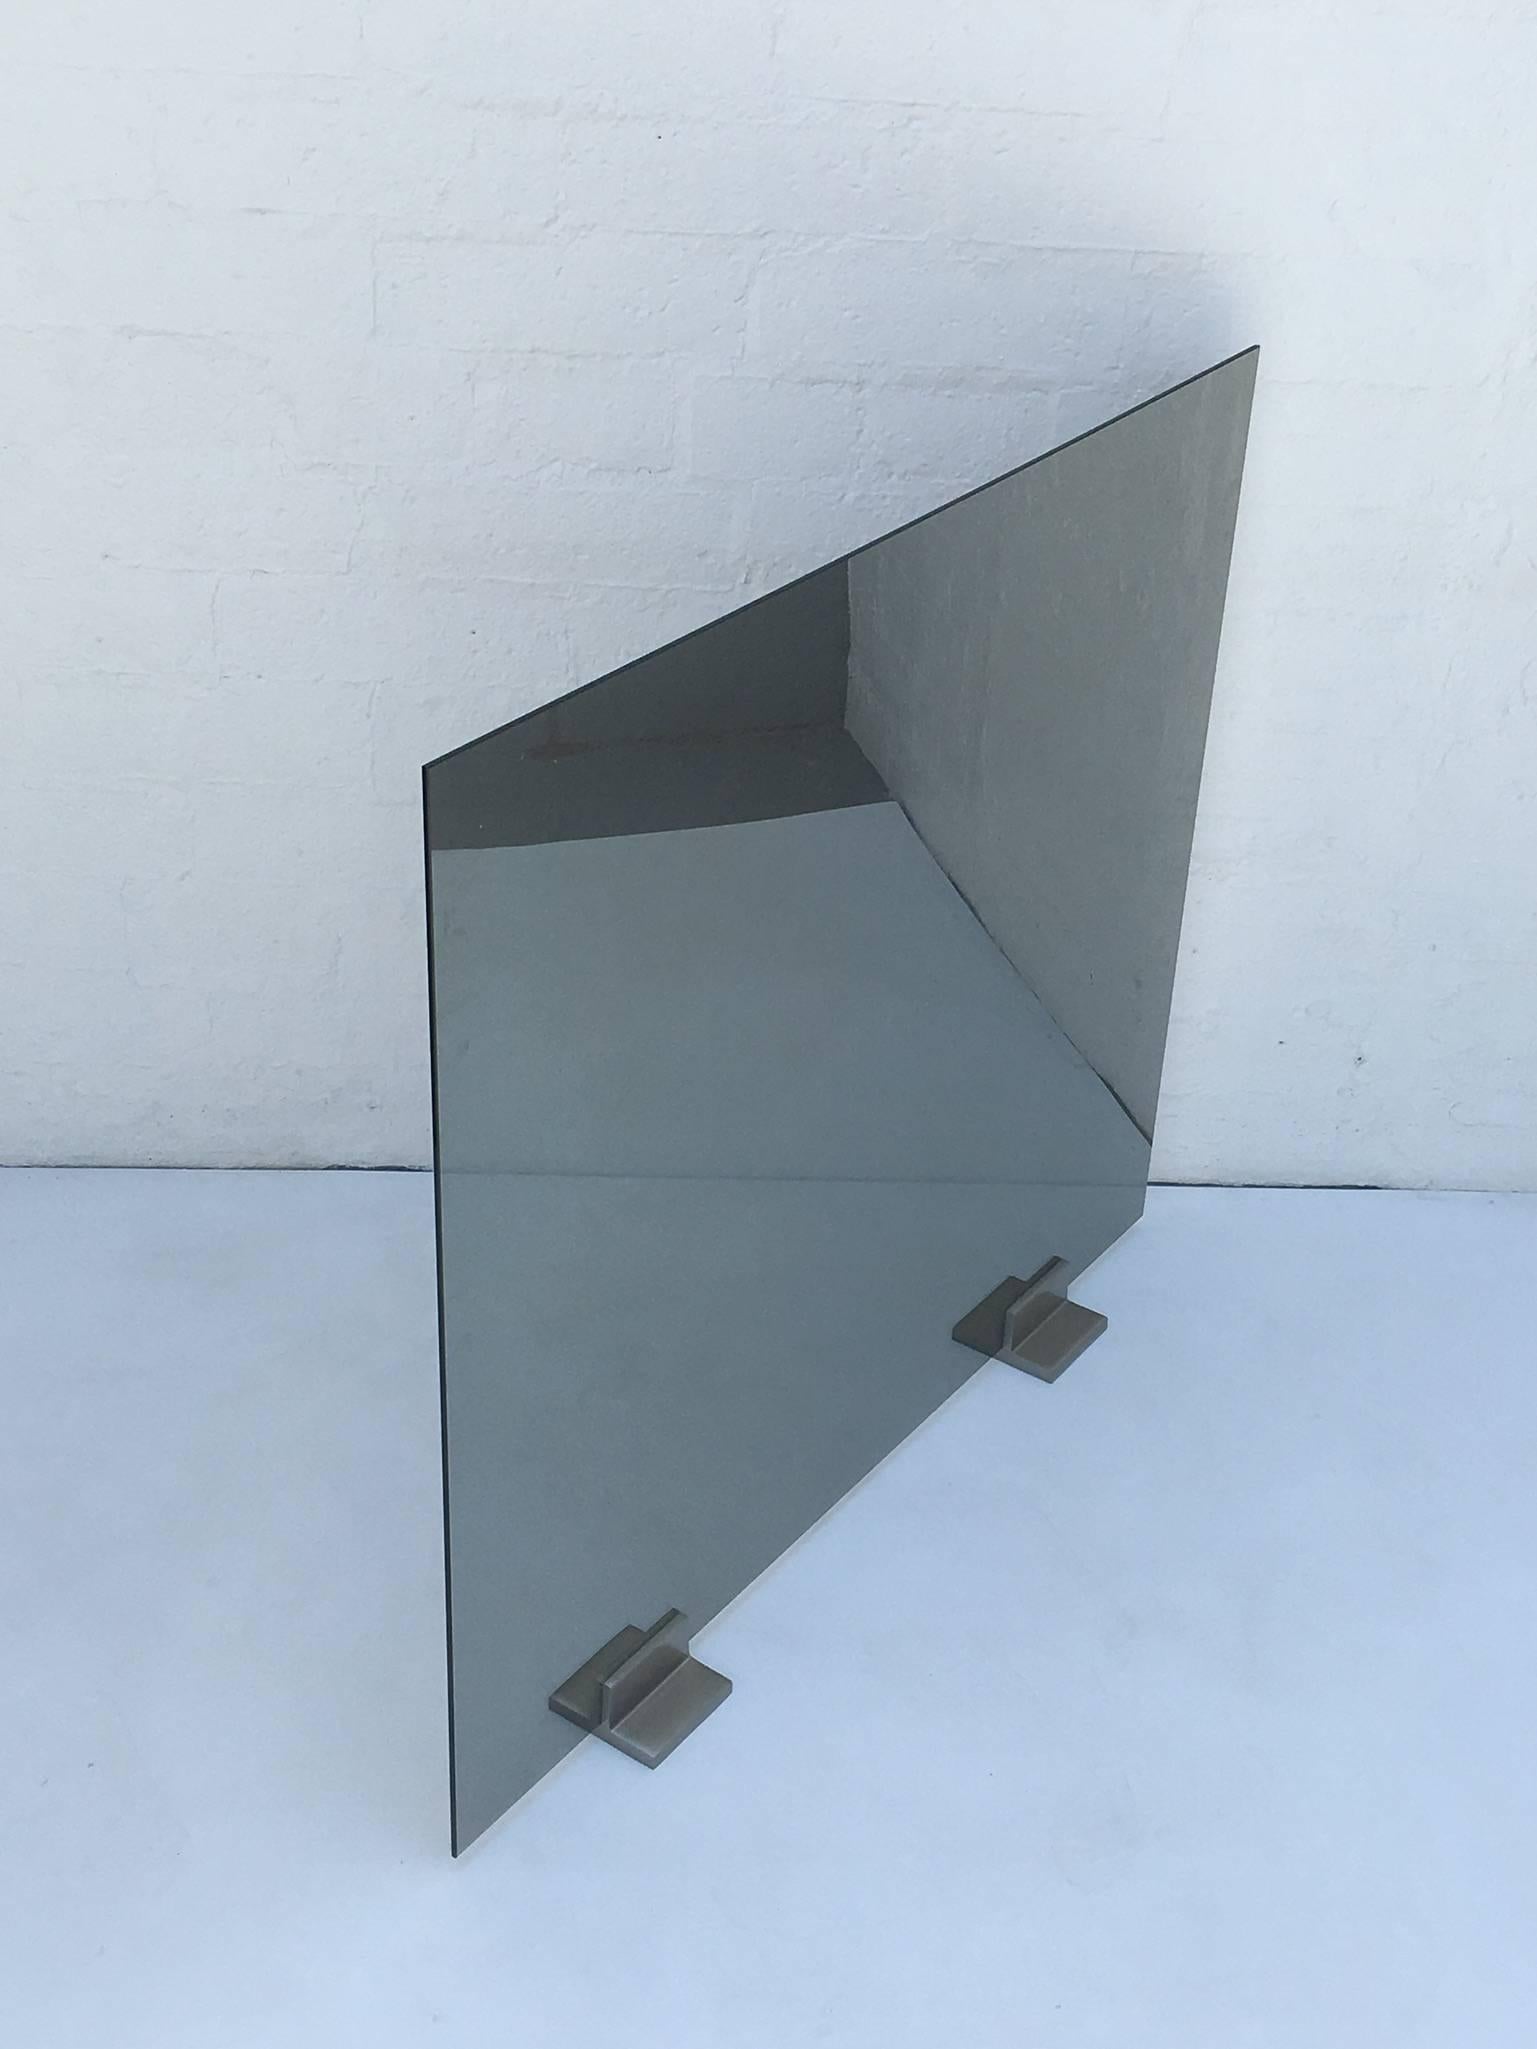 Les is more with this elegant mirror smoked glass with brushed stainless steel feet fireplace screen by Pace Collection from the 1980s.
One side is mirrored but you can see the fire when on.

Diameter: 40